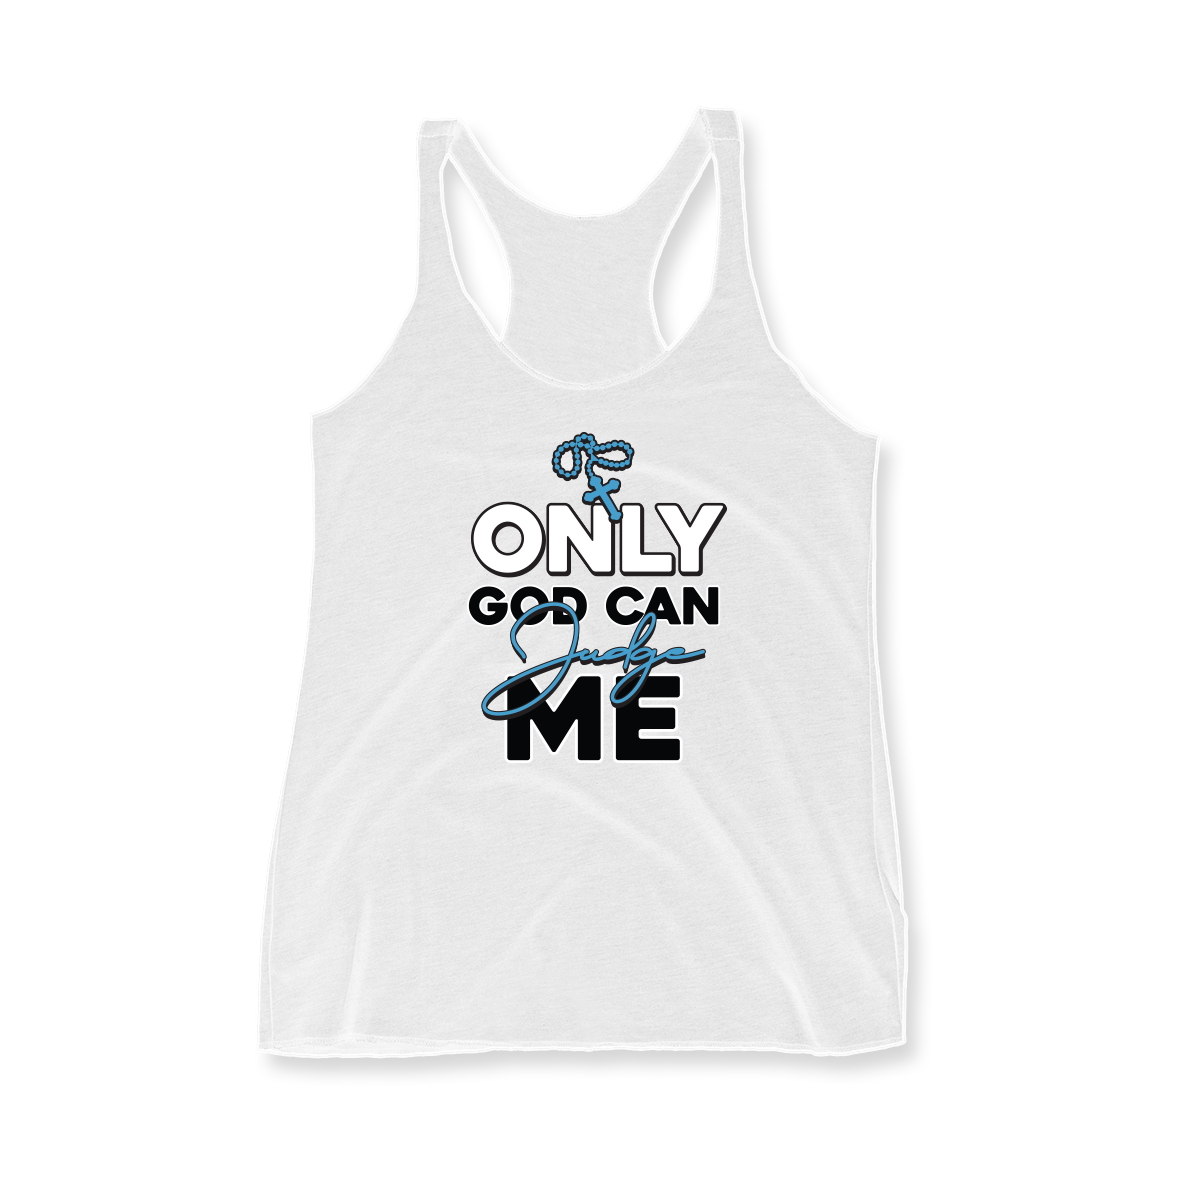 'Only God Can Judge Me' in Powder Blue CW Women's Racerback Tank